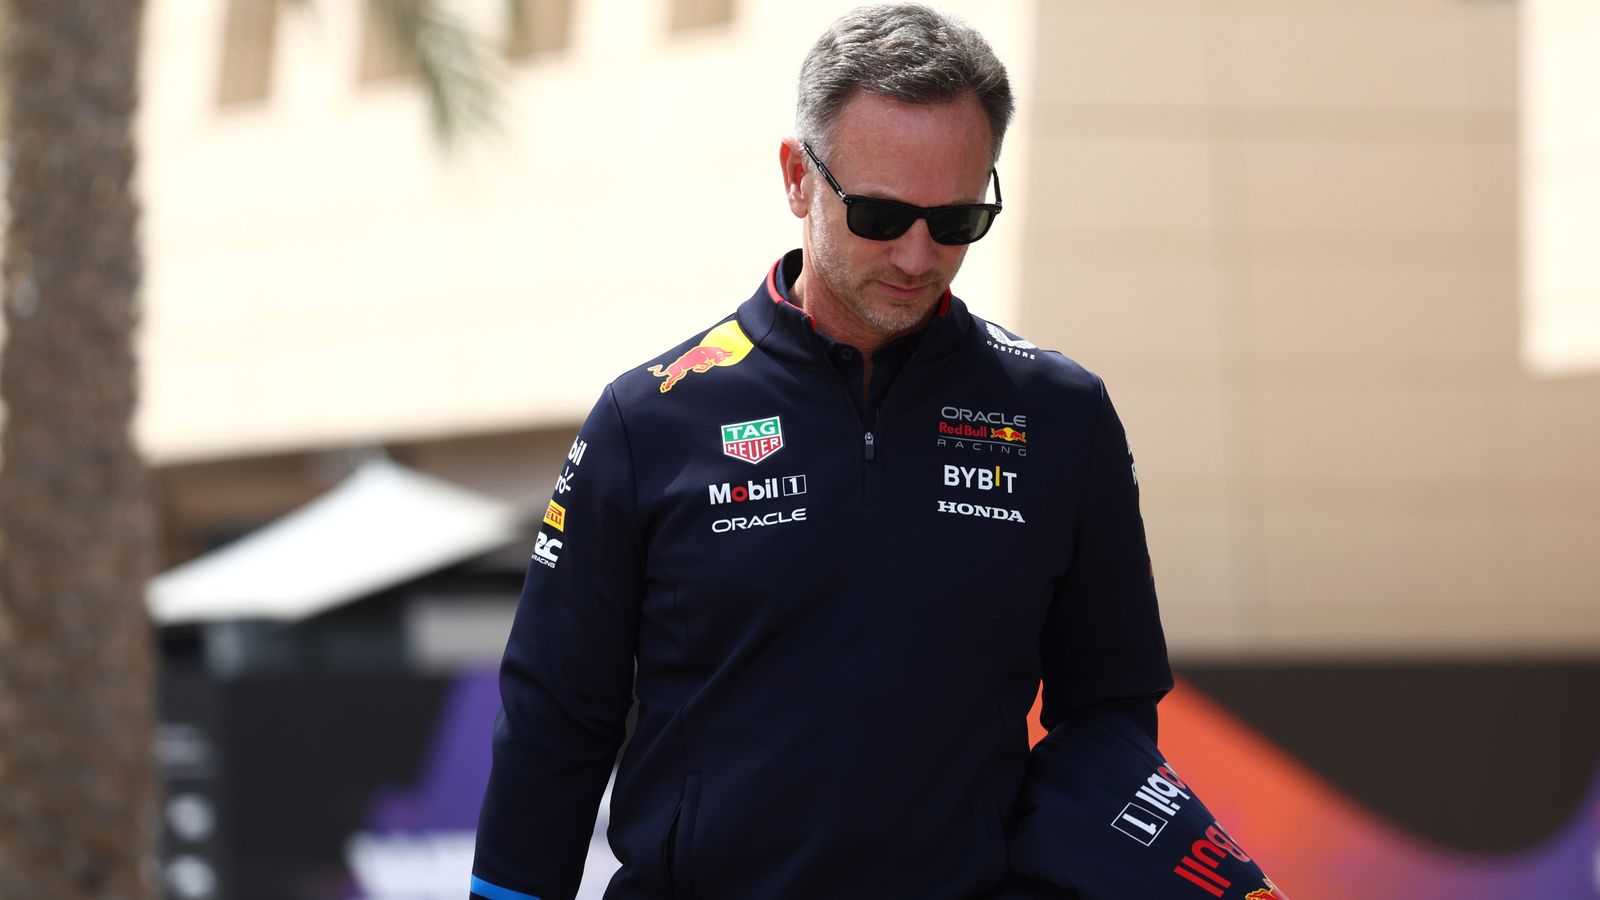 Christian Horner 'distracted' as he refuses to comment on claims of inappropriate behaviour